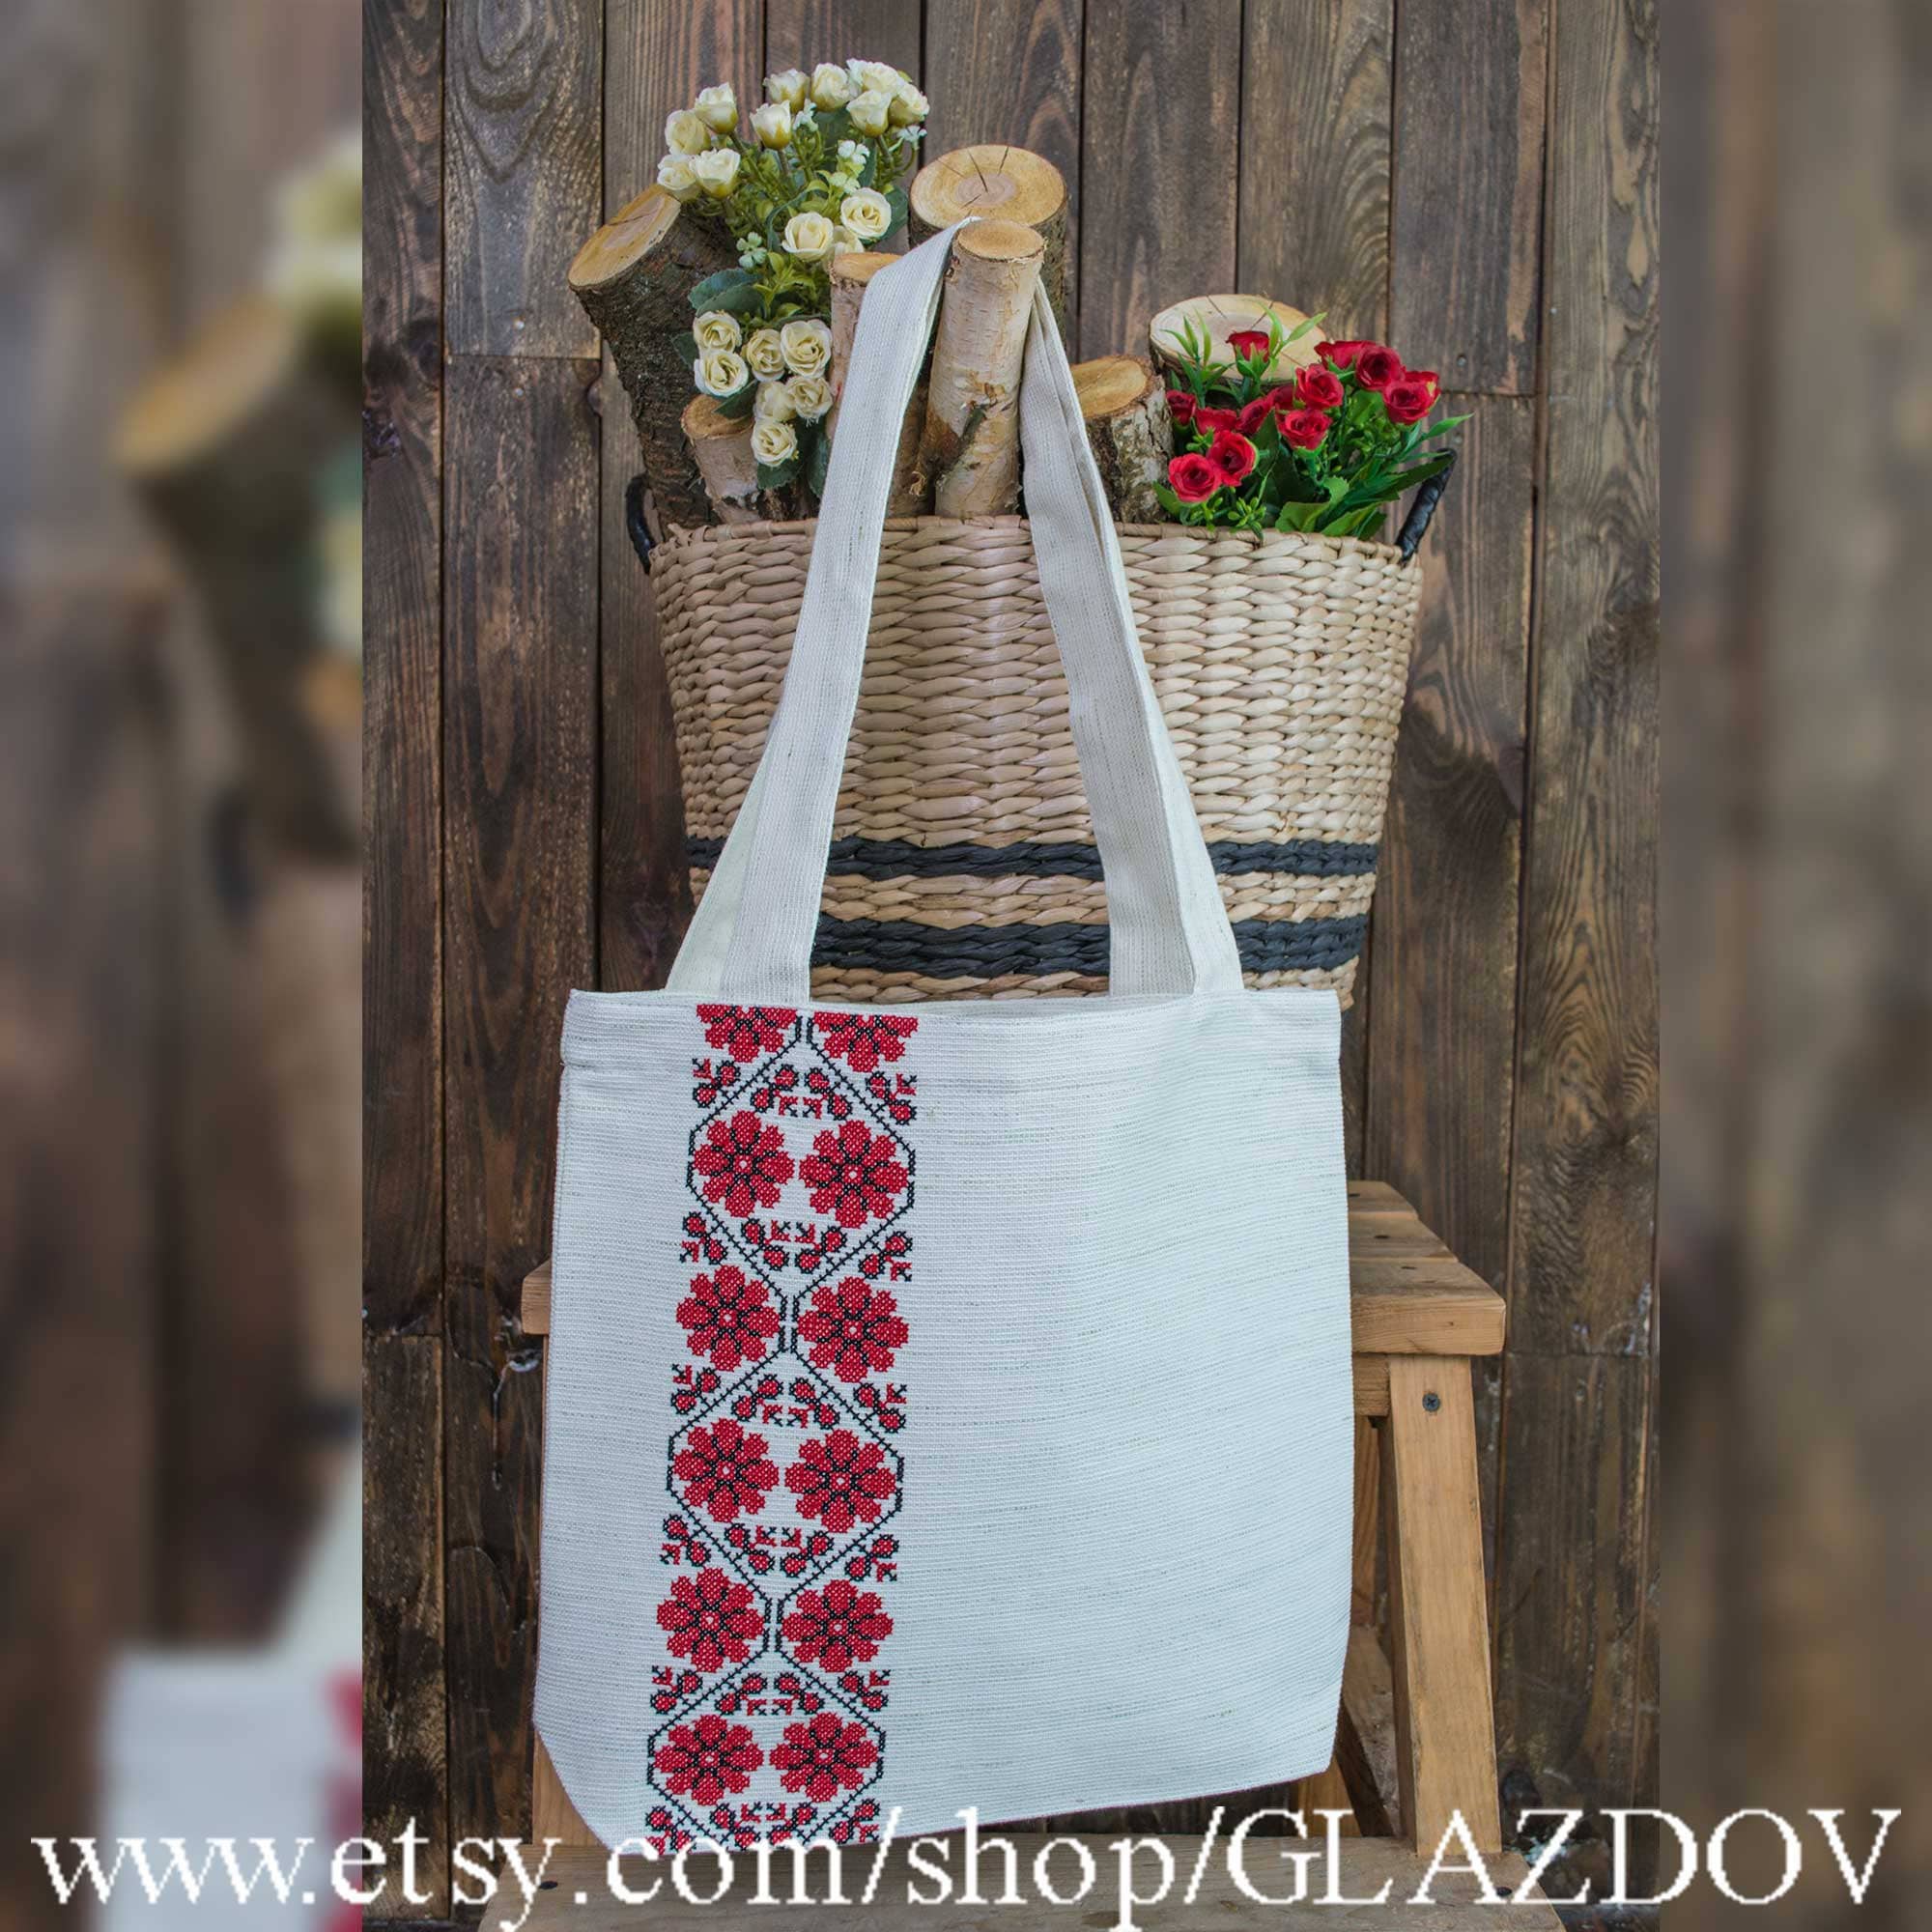 Floral Embroidered bag Linen Cotton Thread Tote Bag 